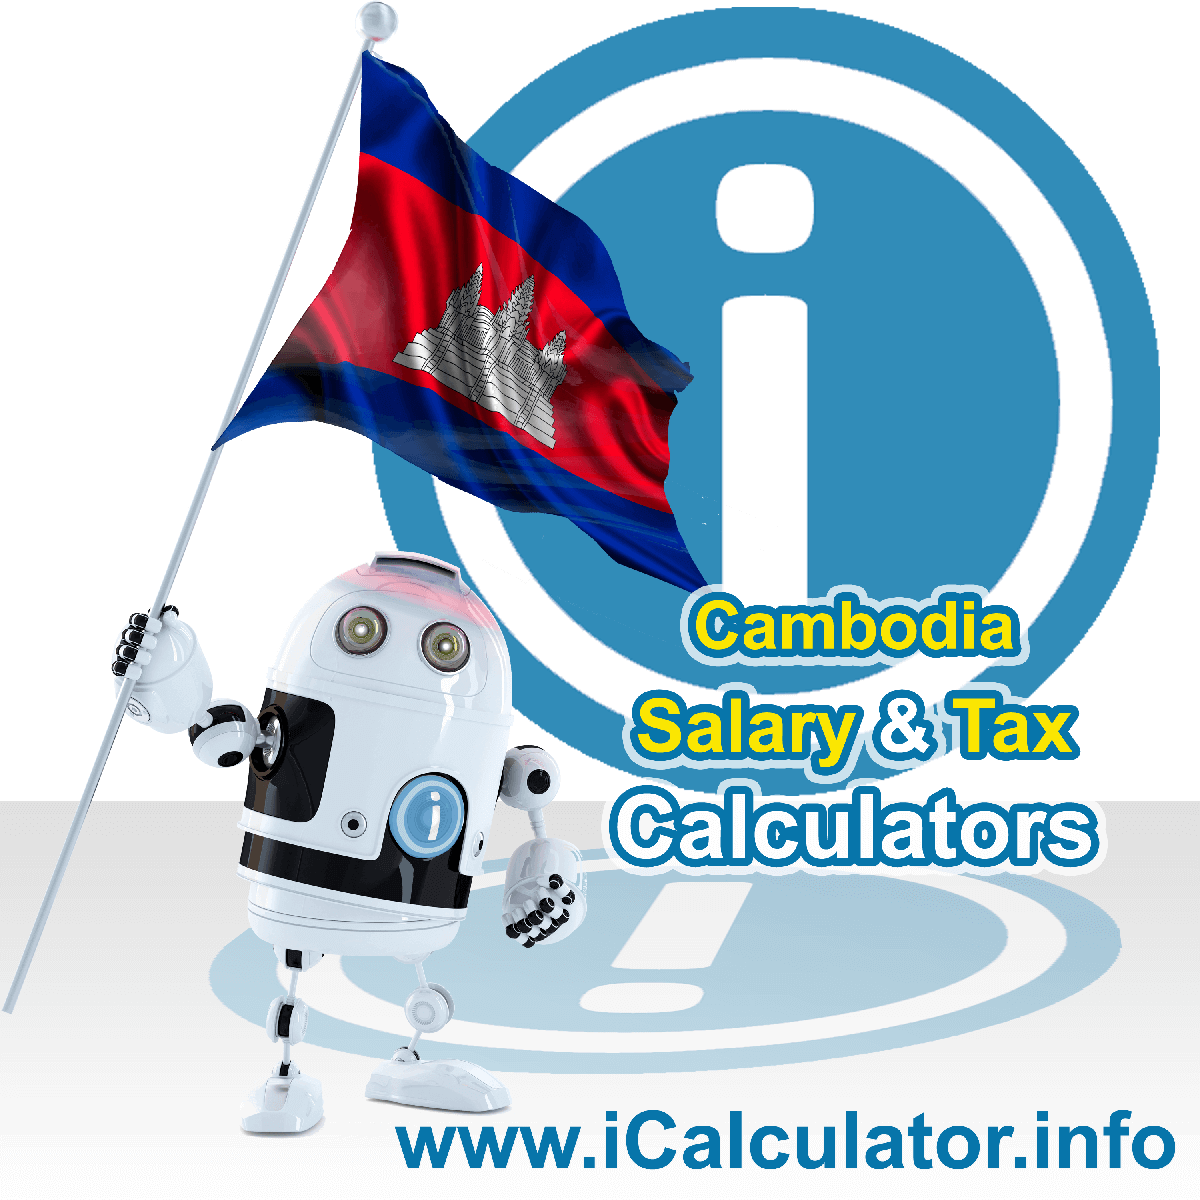 Cambodia Salary Calculator. This image shows the Cambodiaese flag and information relating to the tax formula for the Cambodia Tax Calculator